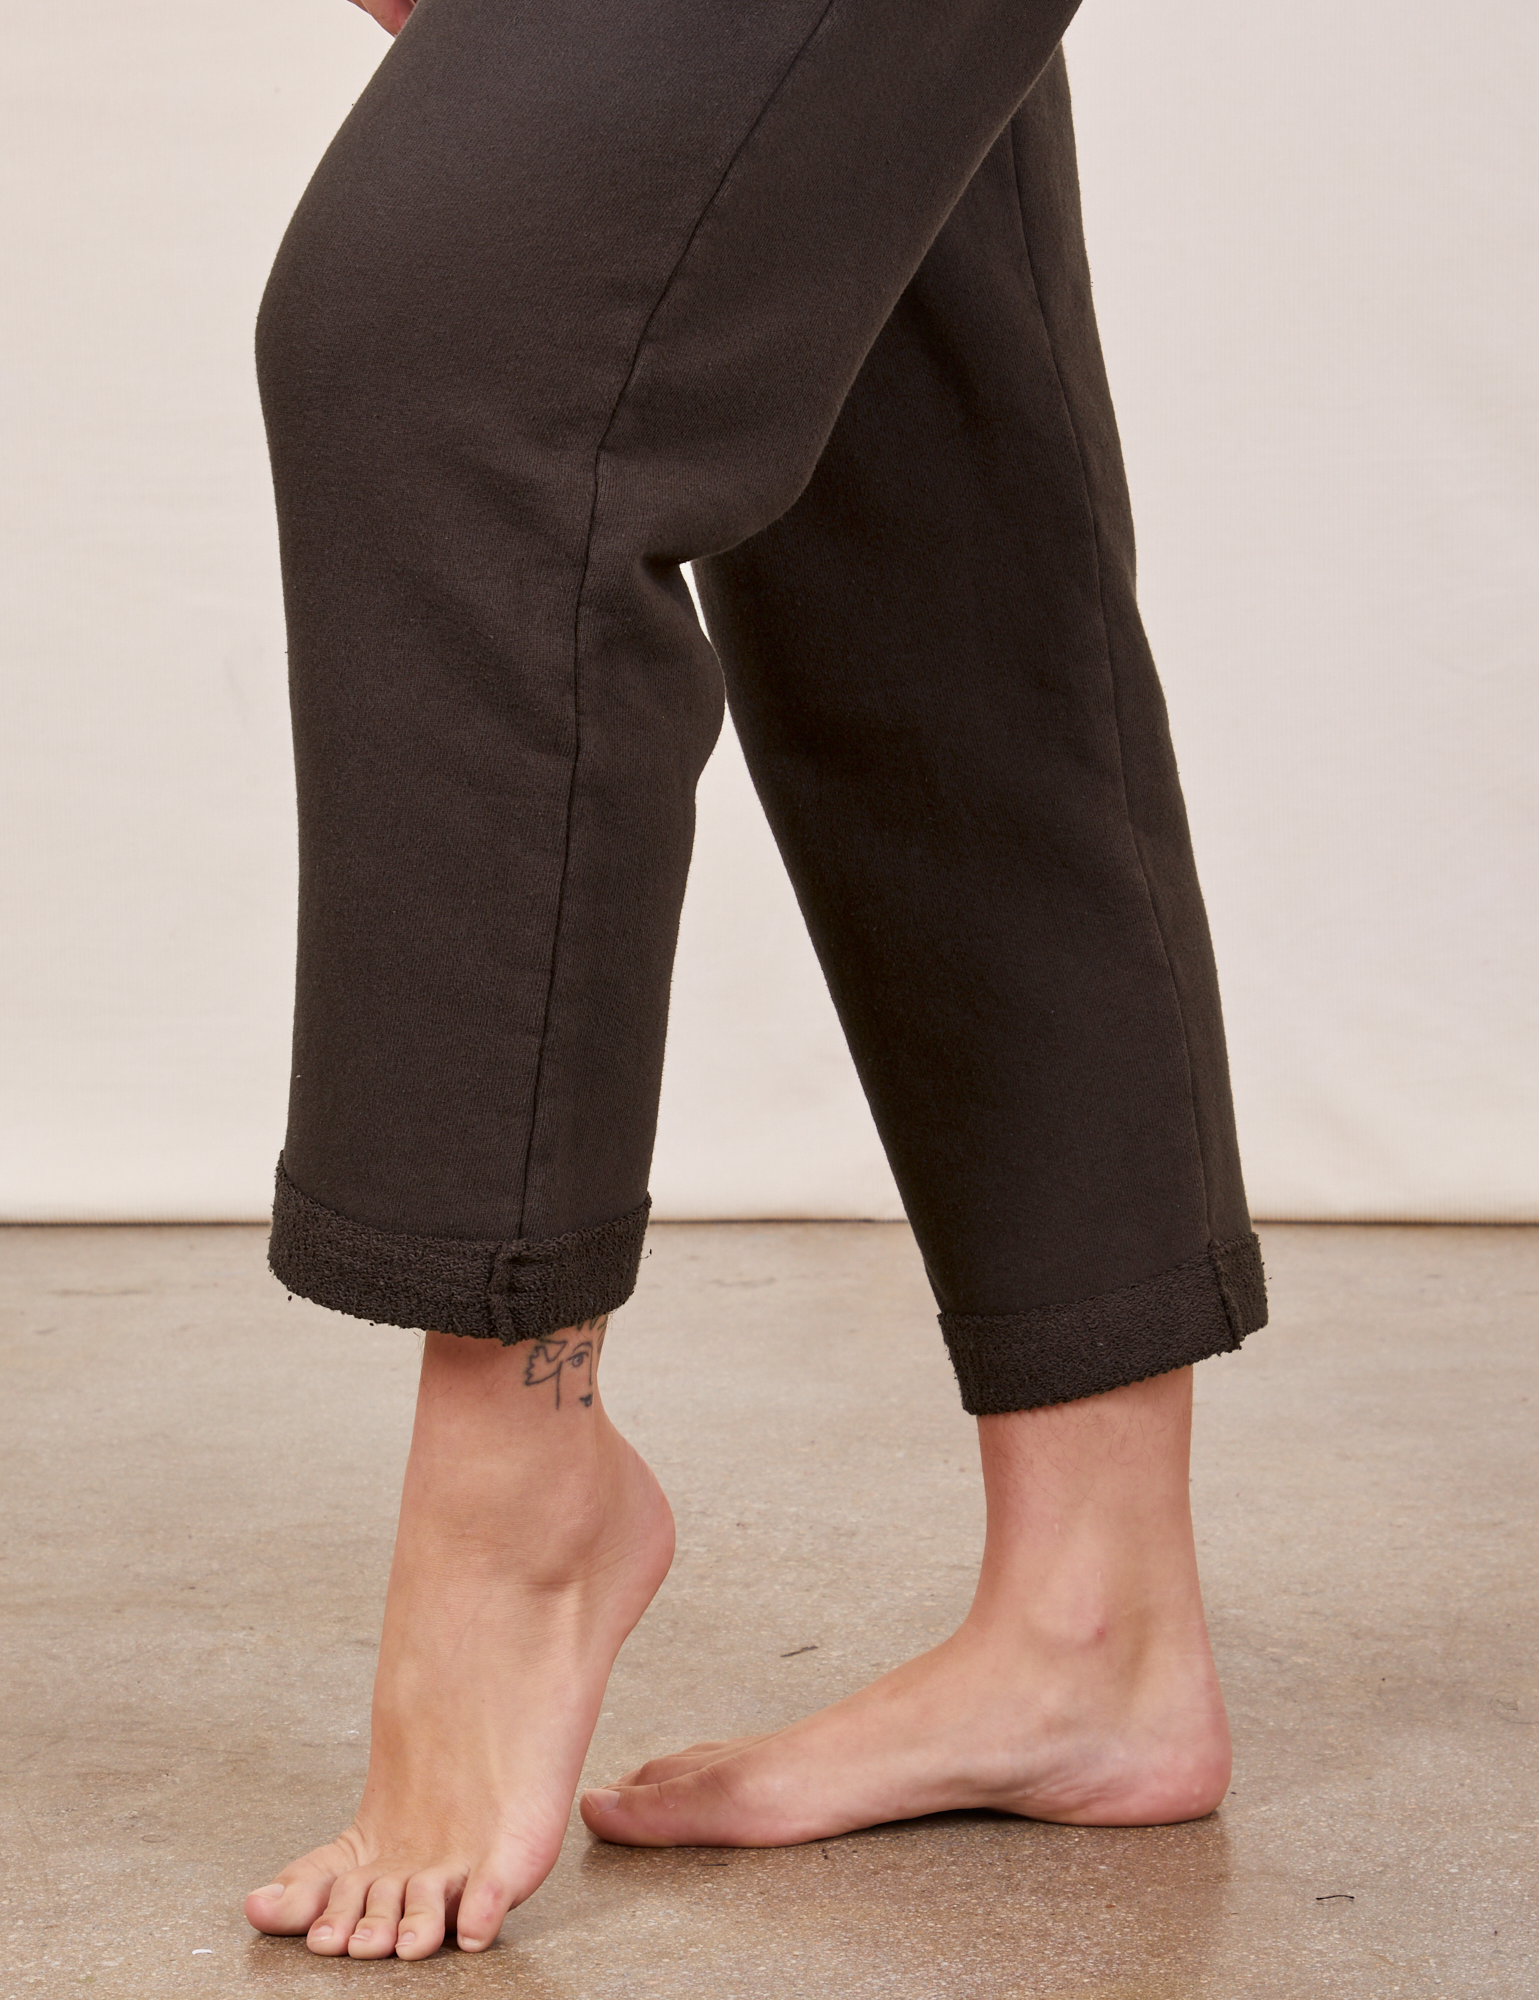 Cropped Rolled Cuff Sweatpants in Espresso Brown pant leg side view close up on Alex